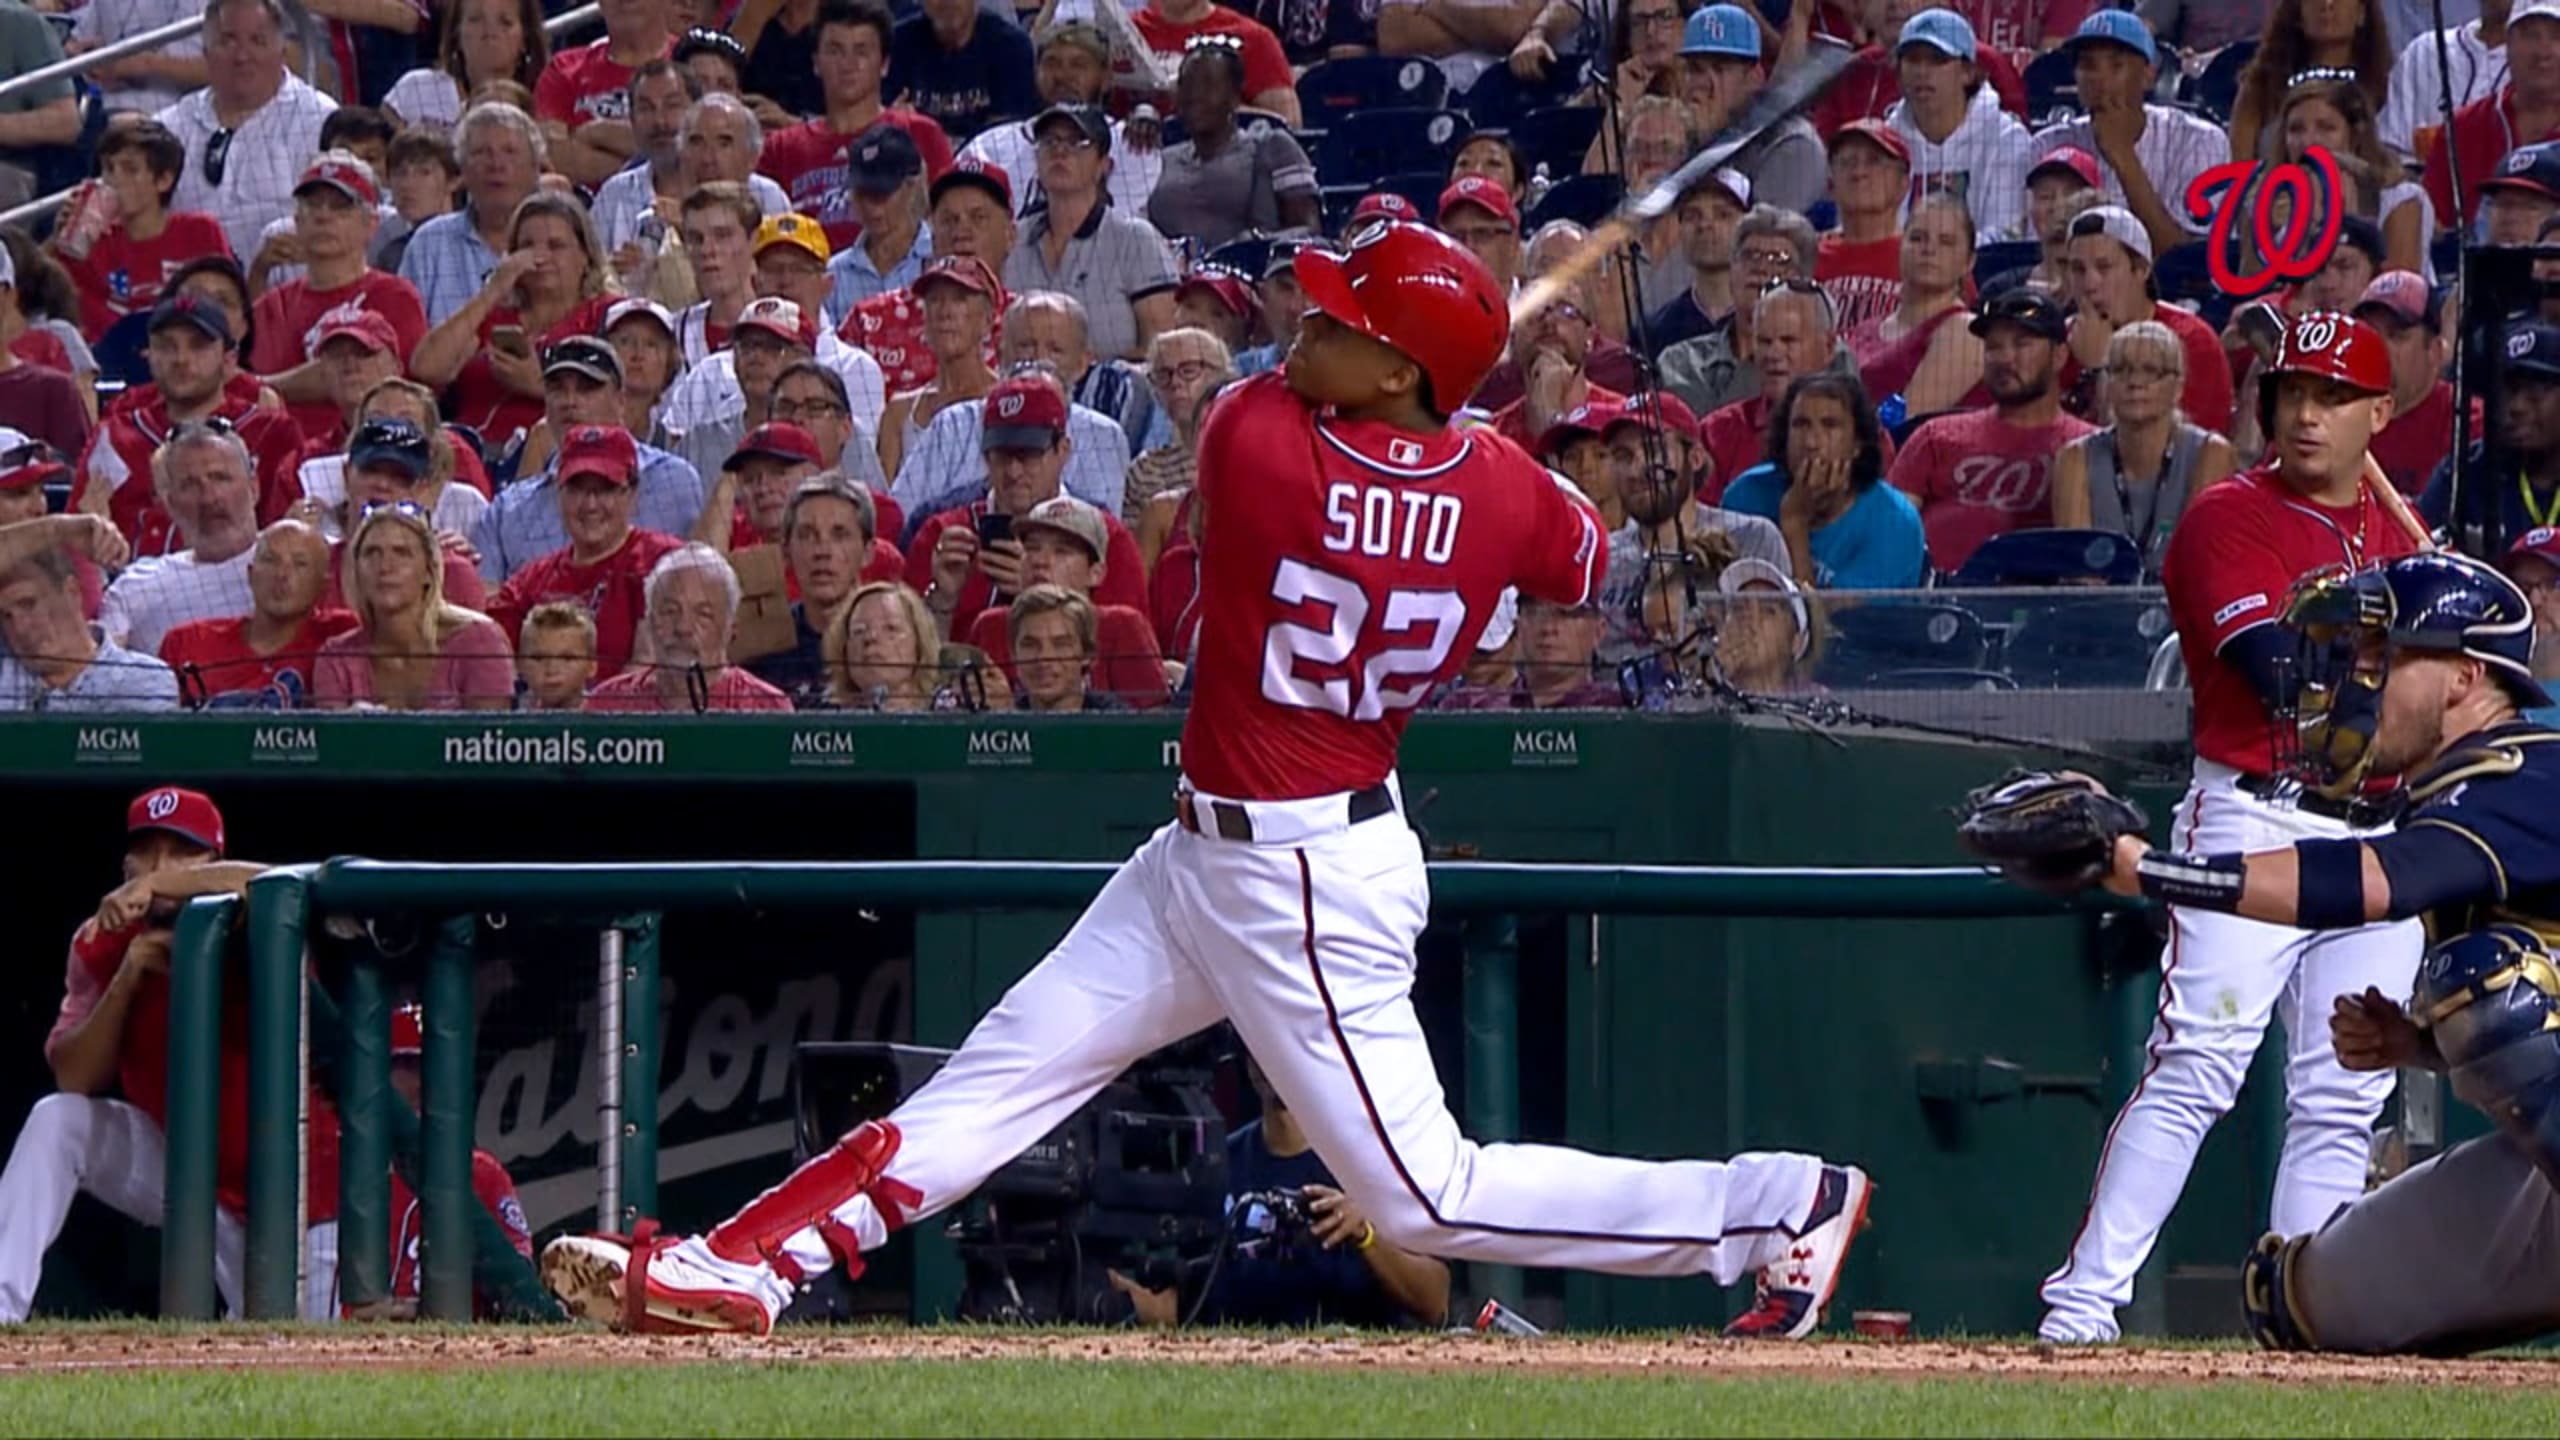 Nats finally play, beat Braves 6-5 on Soto's walk-off in 9th - The